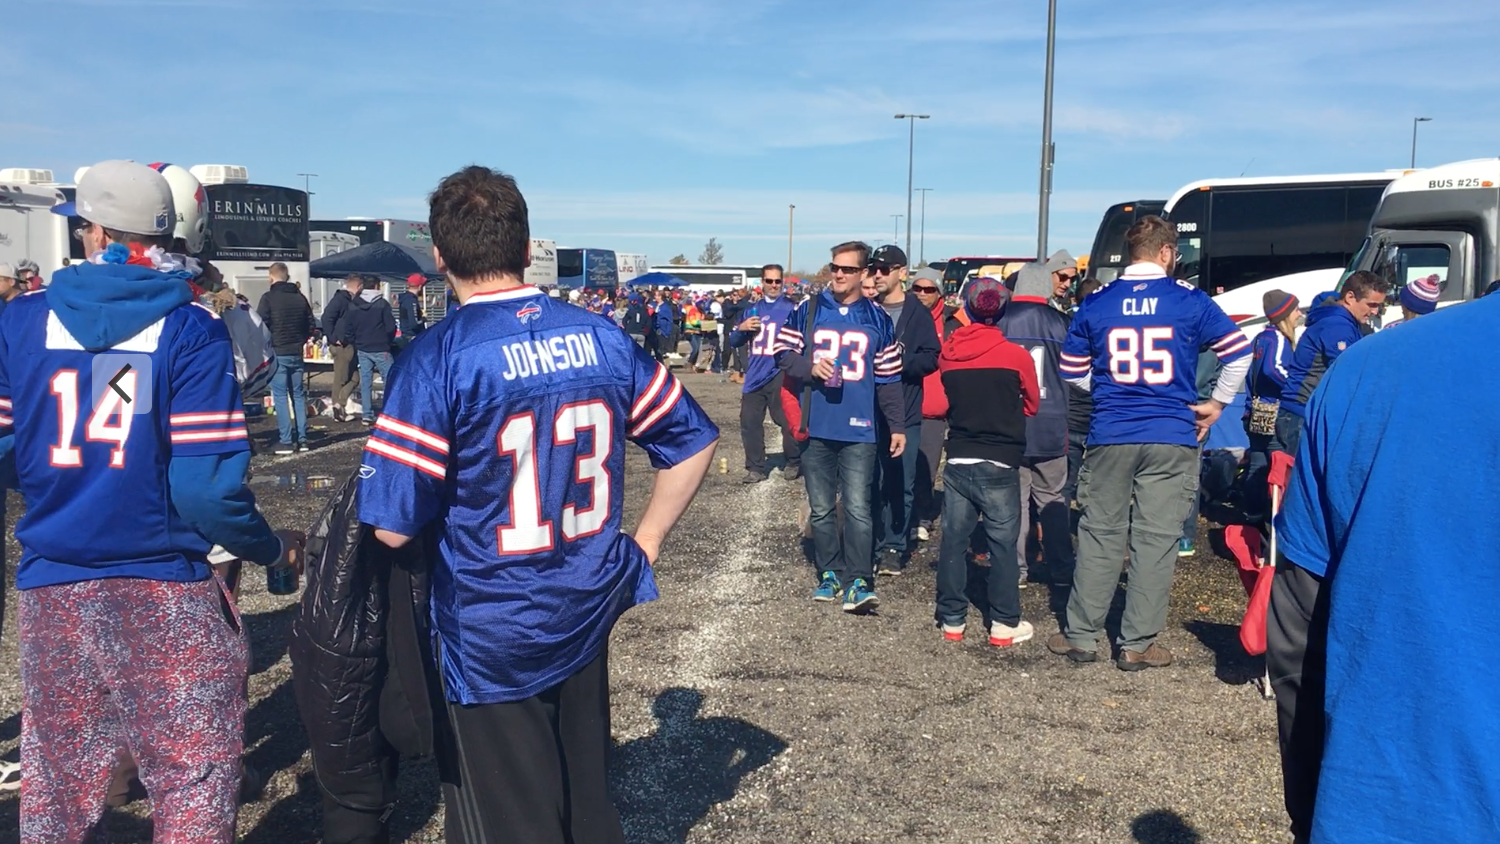 Attending a Buffalo Bills Home Game - Ultimate Sports Road Trip